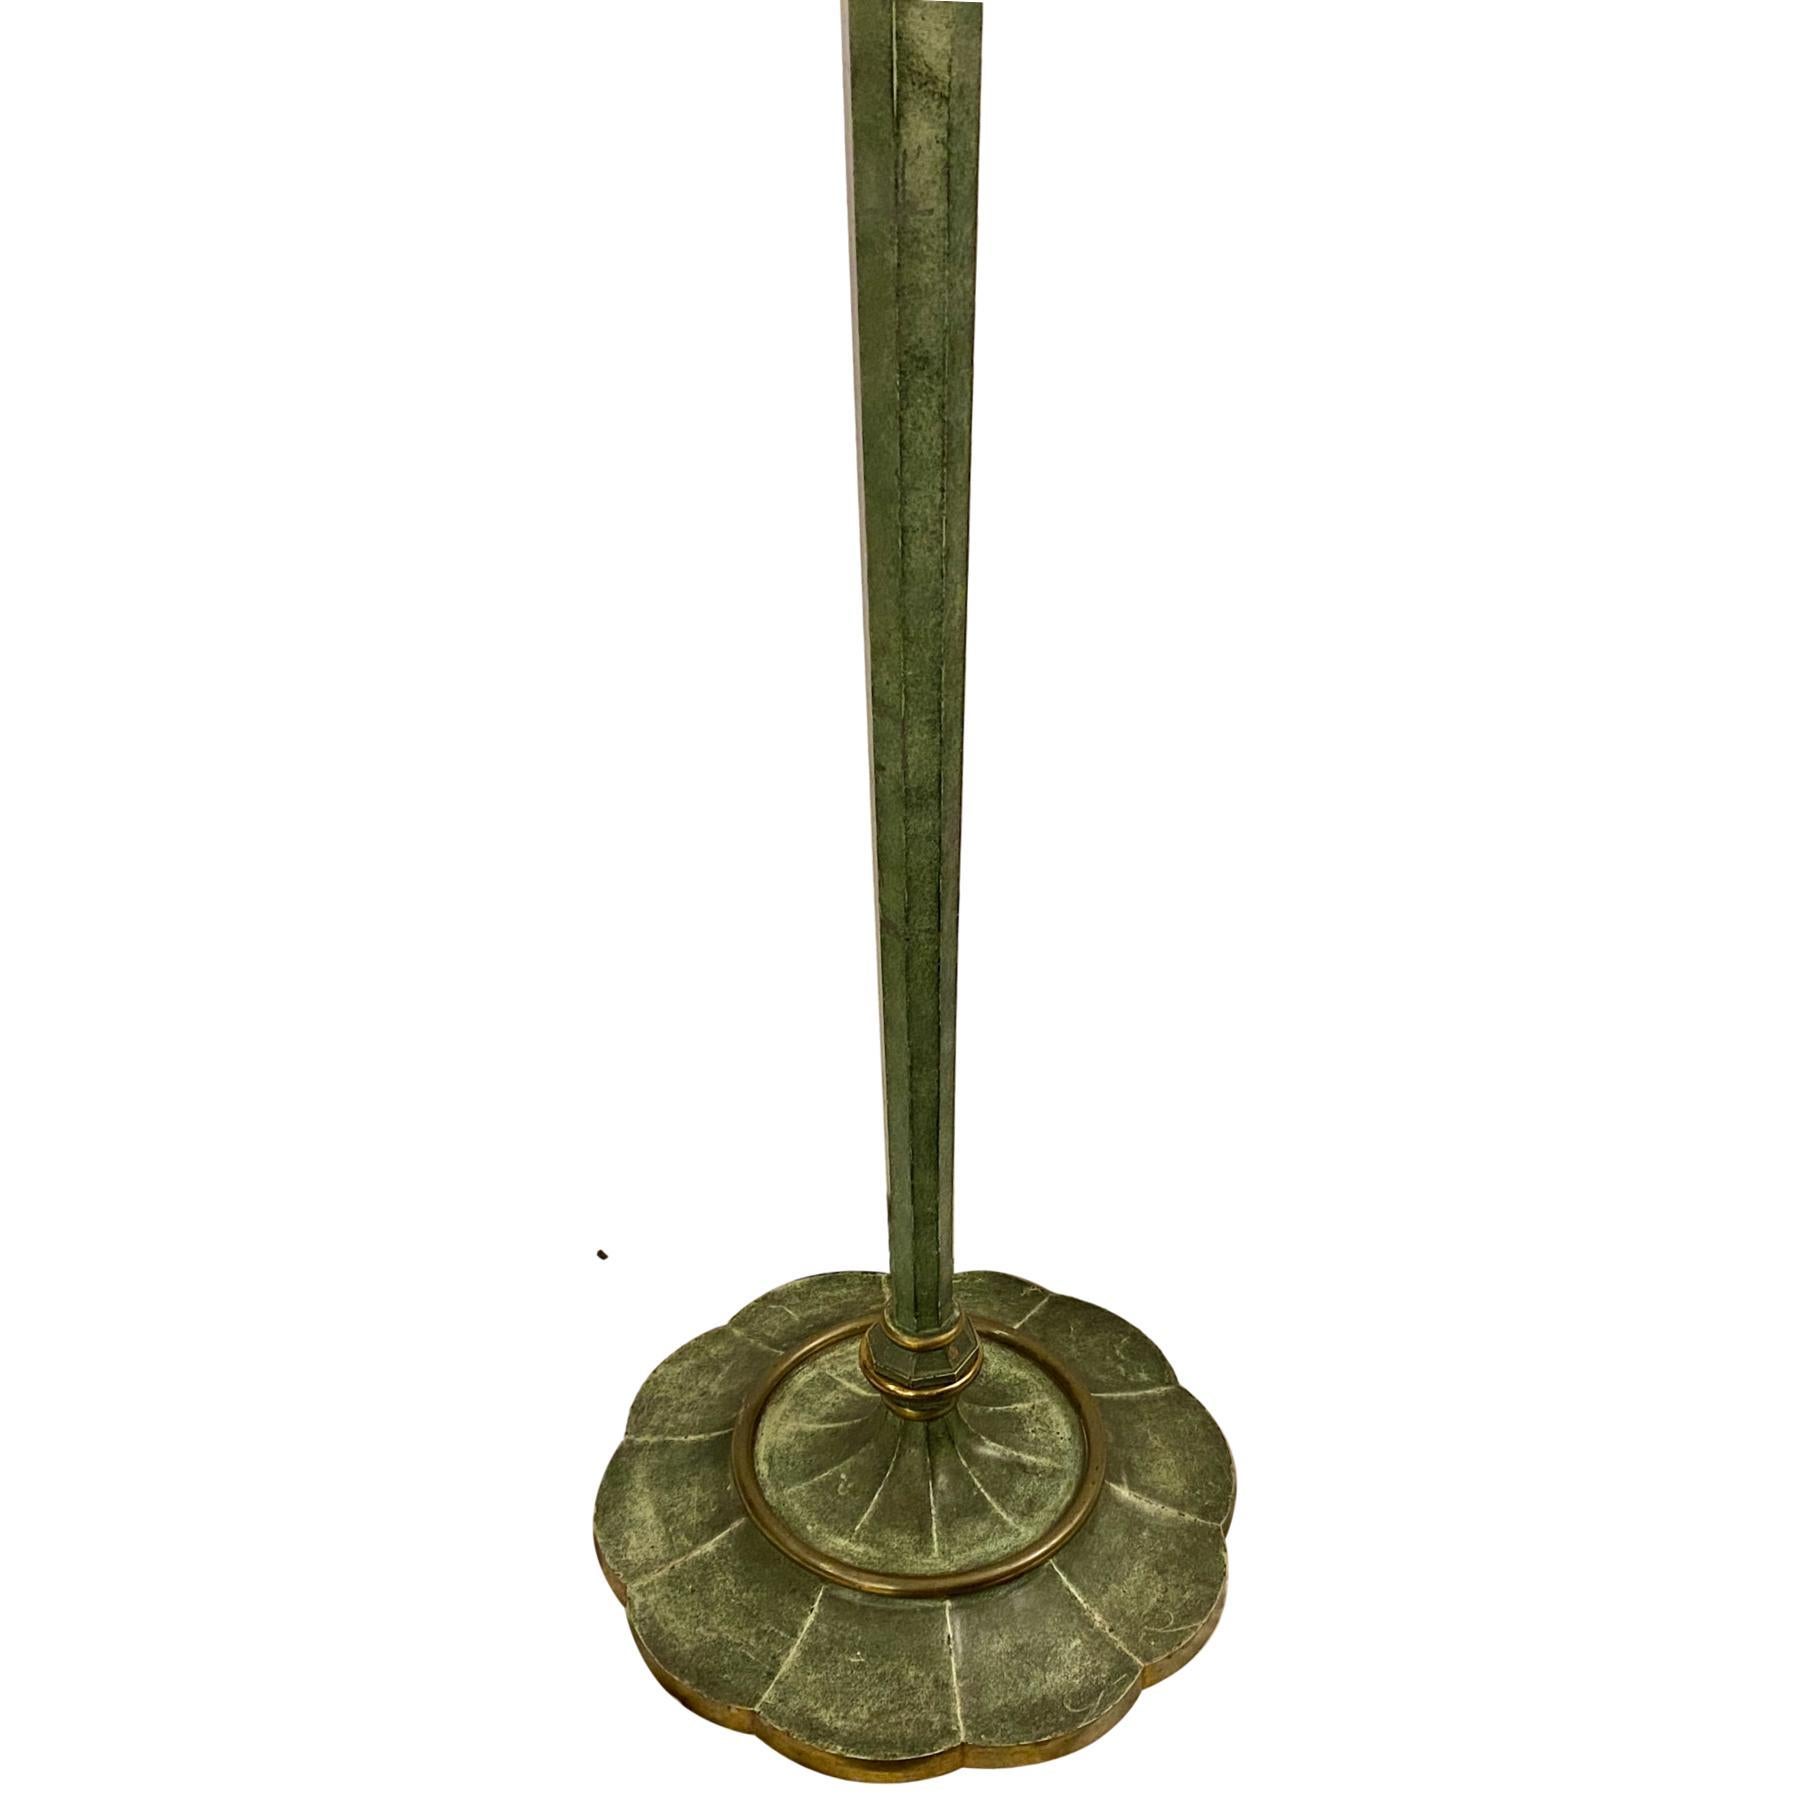 A circa late 1940's hand-painted metal floor lamp with base in the shape of a lilly pad and original patina.

Measurements:
Height of body: 58